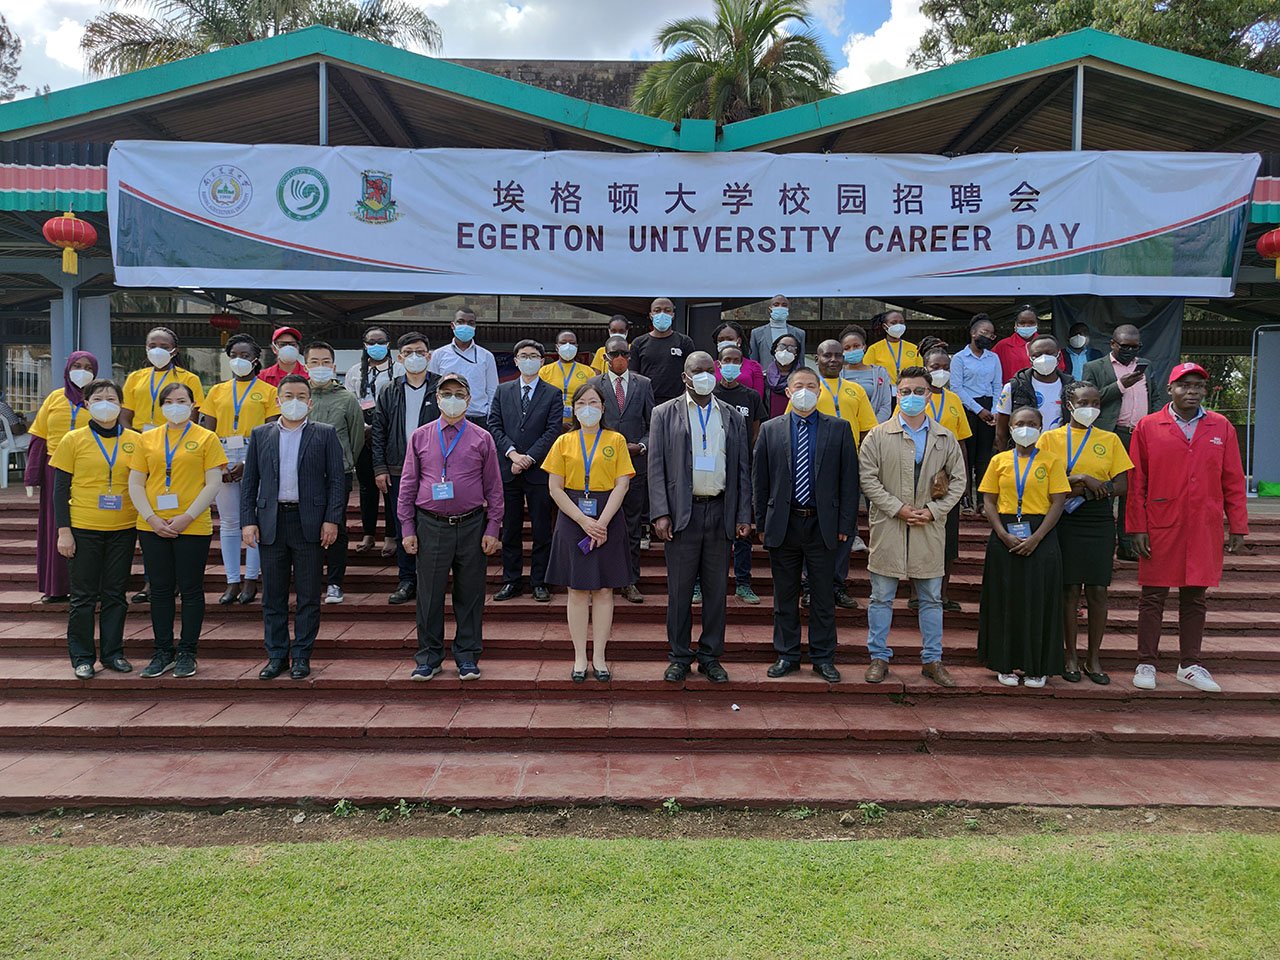 Confucius Institute hosted the 2nd Career Day at Egerton University